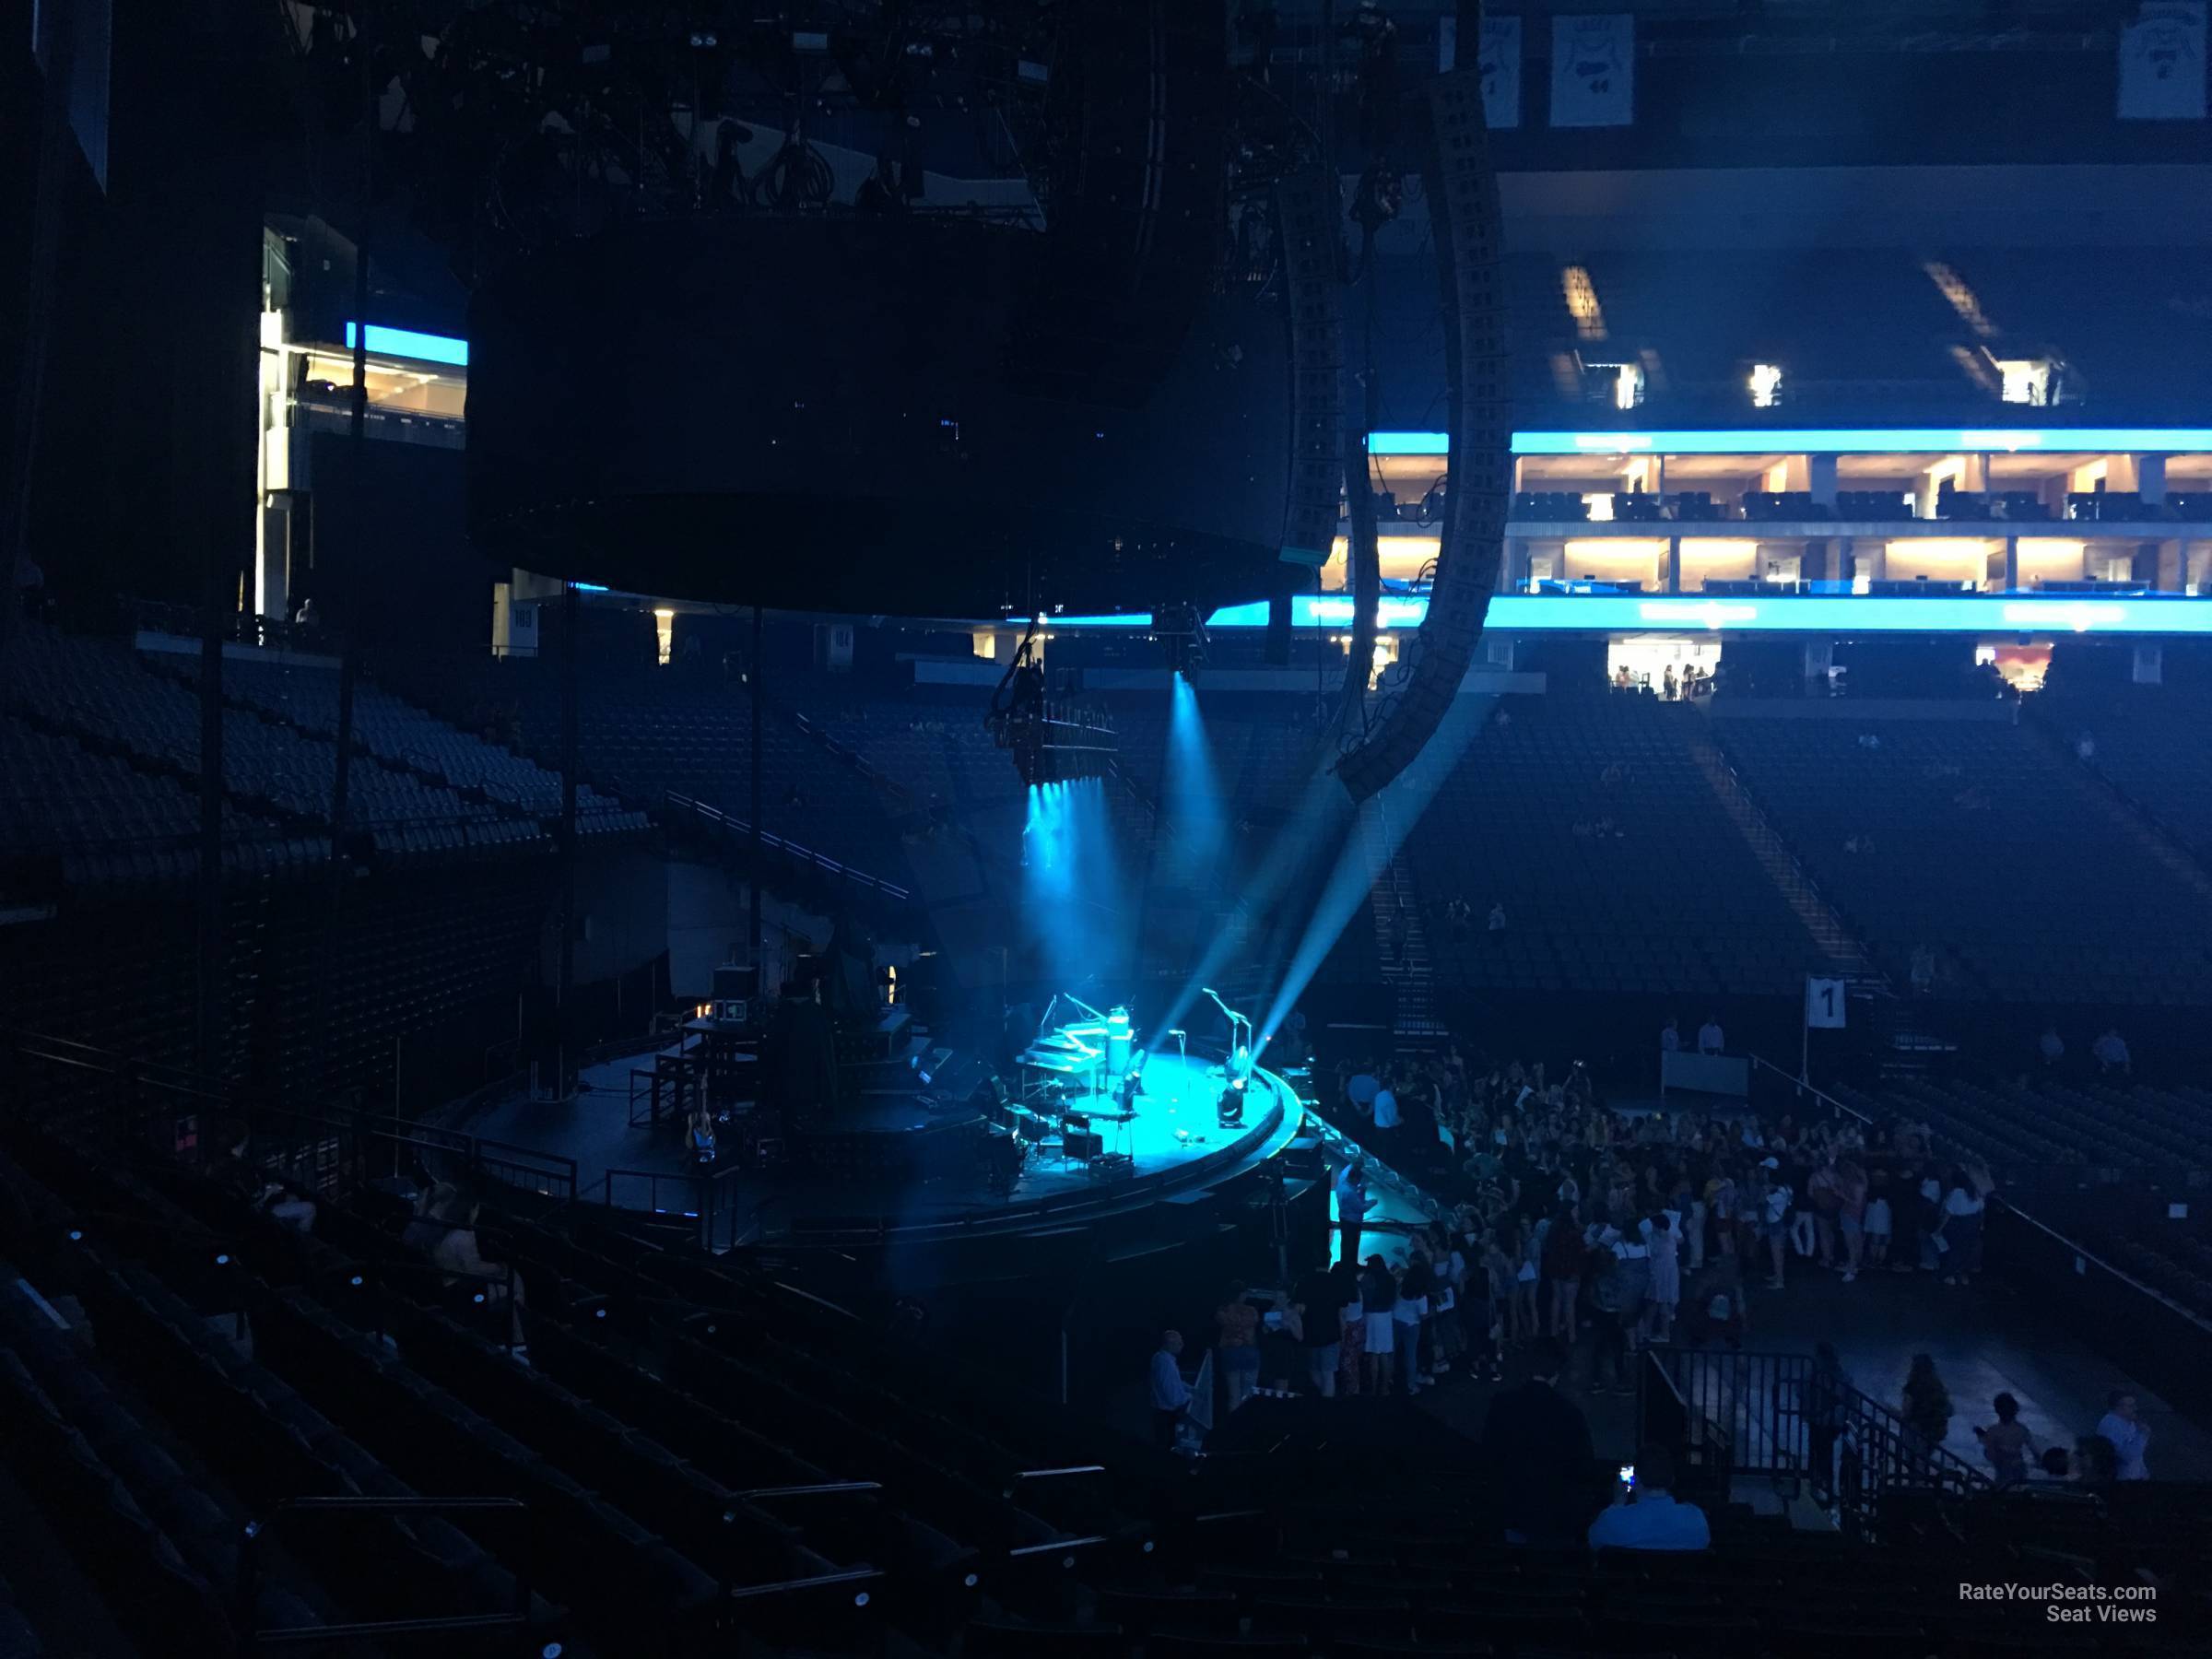 section 122, row m seat view  for concert - golden 1 center